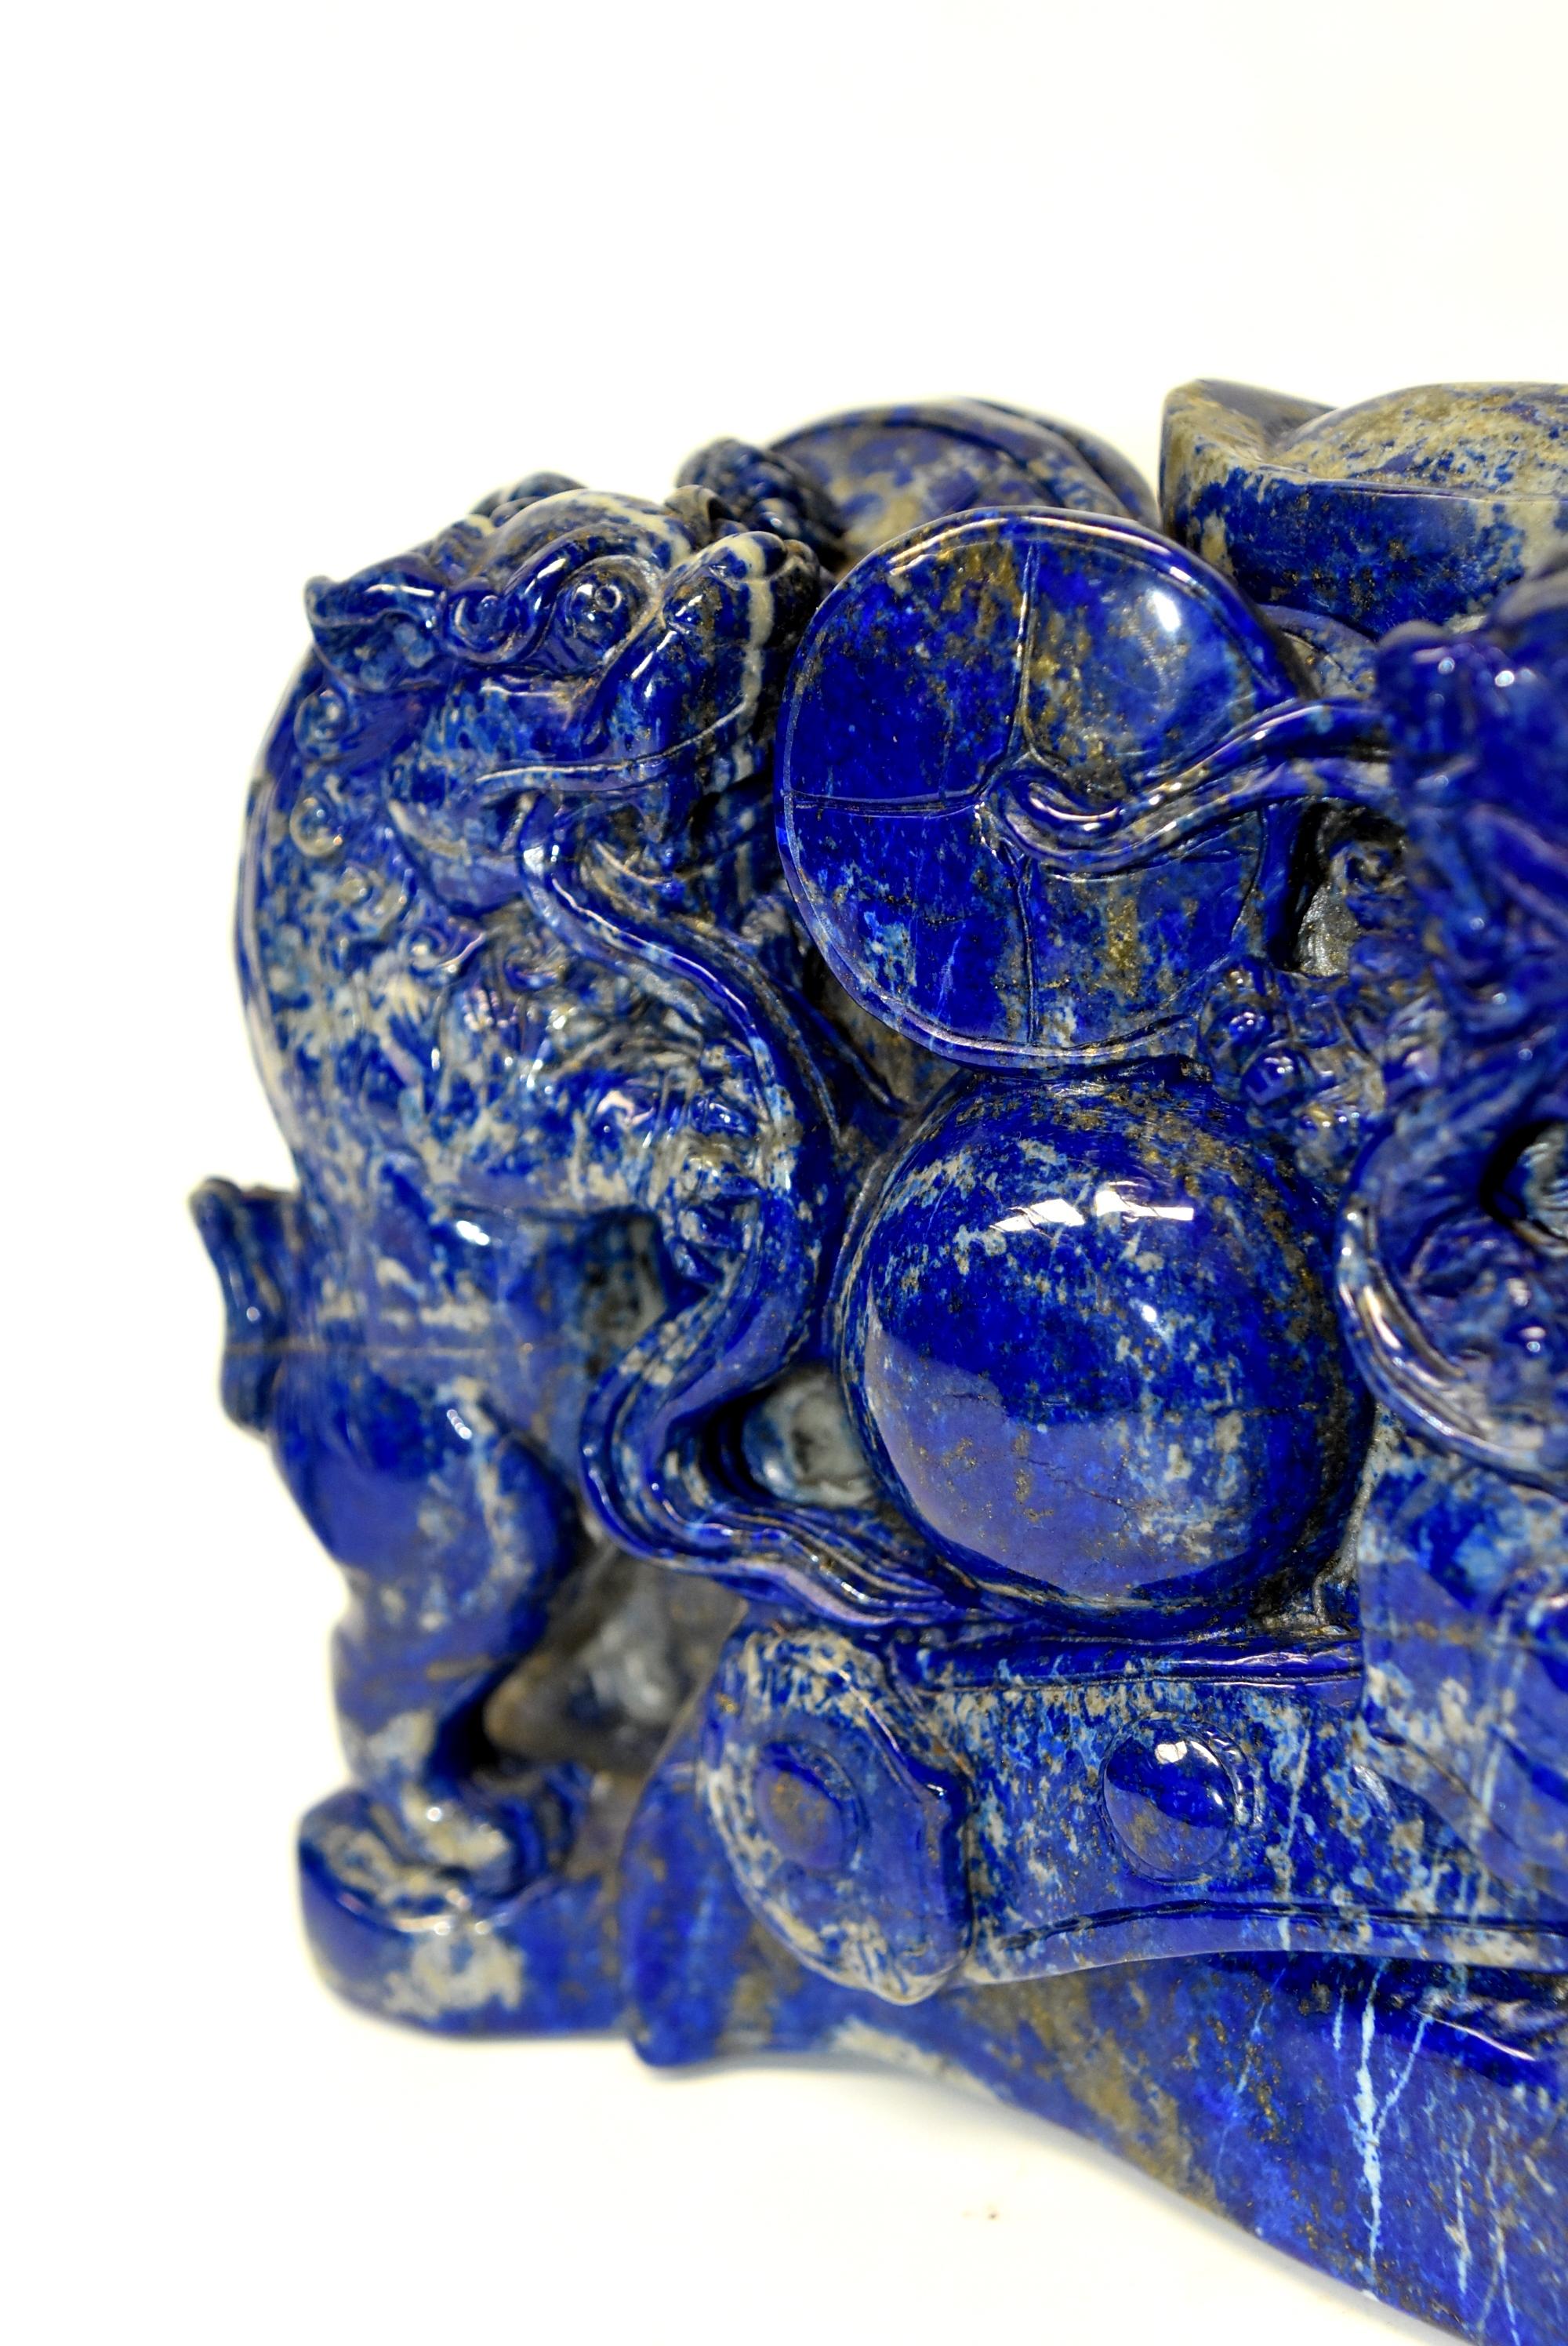 Contemporary Natural Lapis Lazuli 8 lb Block with Carved Lions